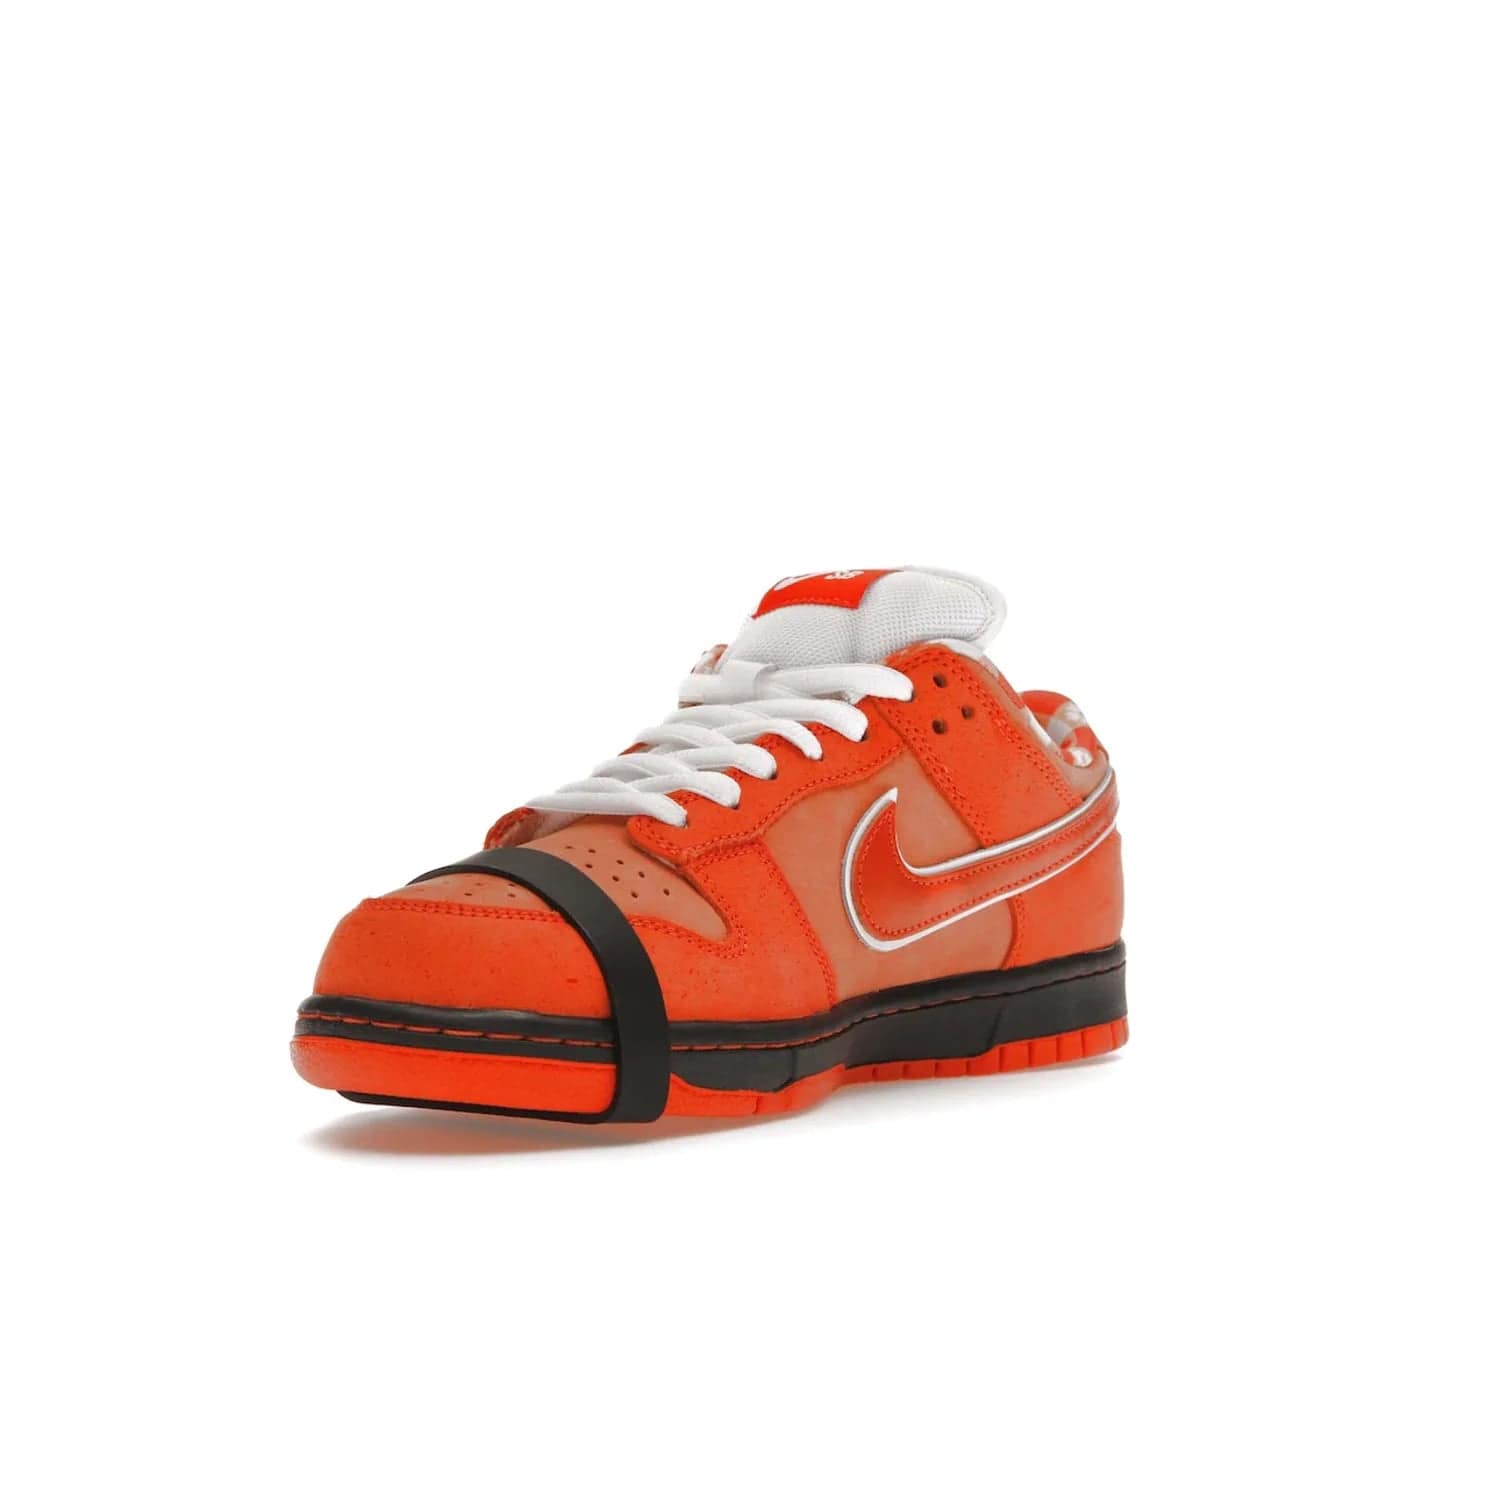 Nike SB Dunk Low Concepts Orange Lobster - Image 14 - Only at www.BallersClubKickz.com - Make a statement with the Nike SB Dunk Low Concepts Orange Lobster. Variety of orange hues, nubuck upper, bib-inspired lining & rubber outsole create bold look & comfortable blend of style. Available December 20th, 2022.